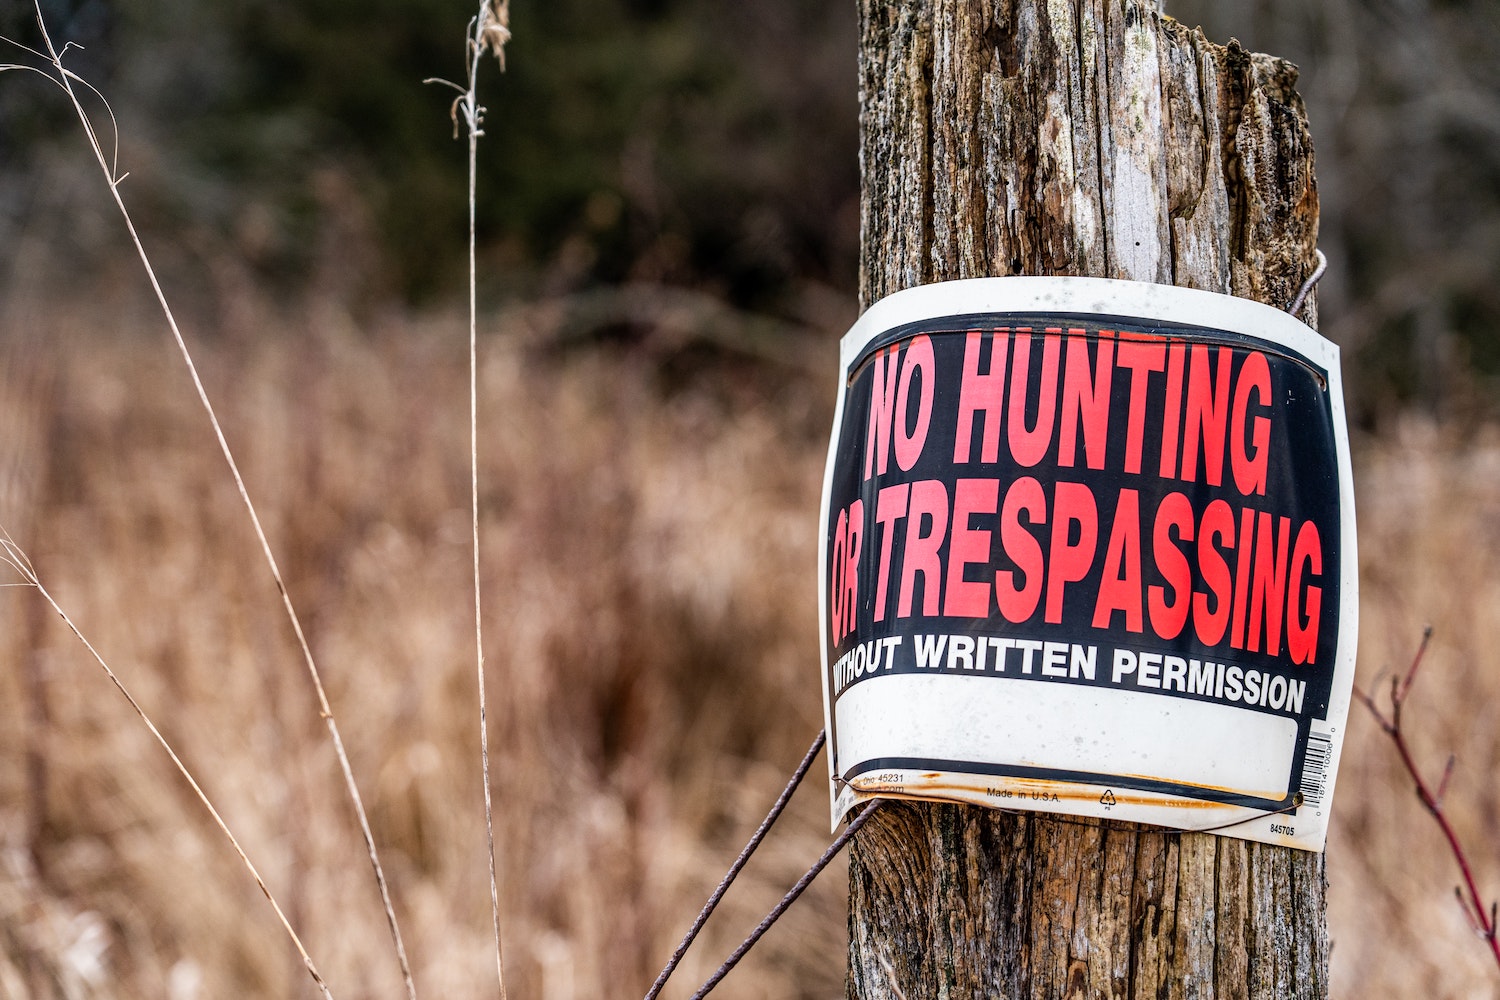 Even on posted private property hunters can retrieve their hunting dog in Virginia.